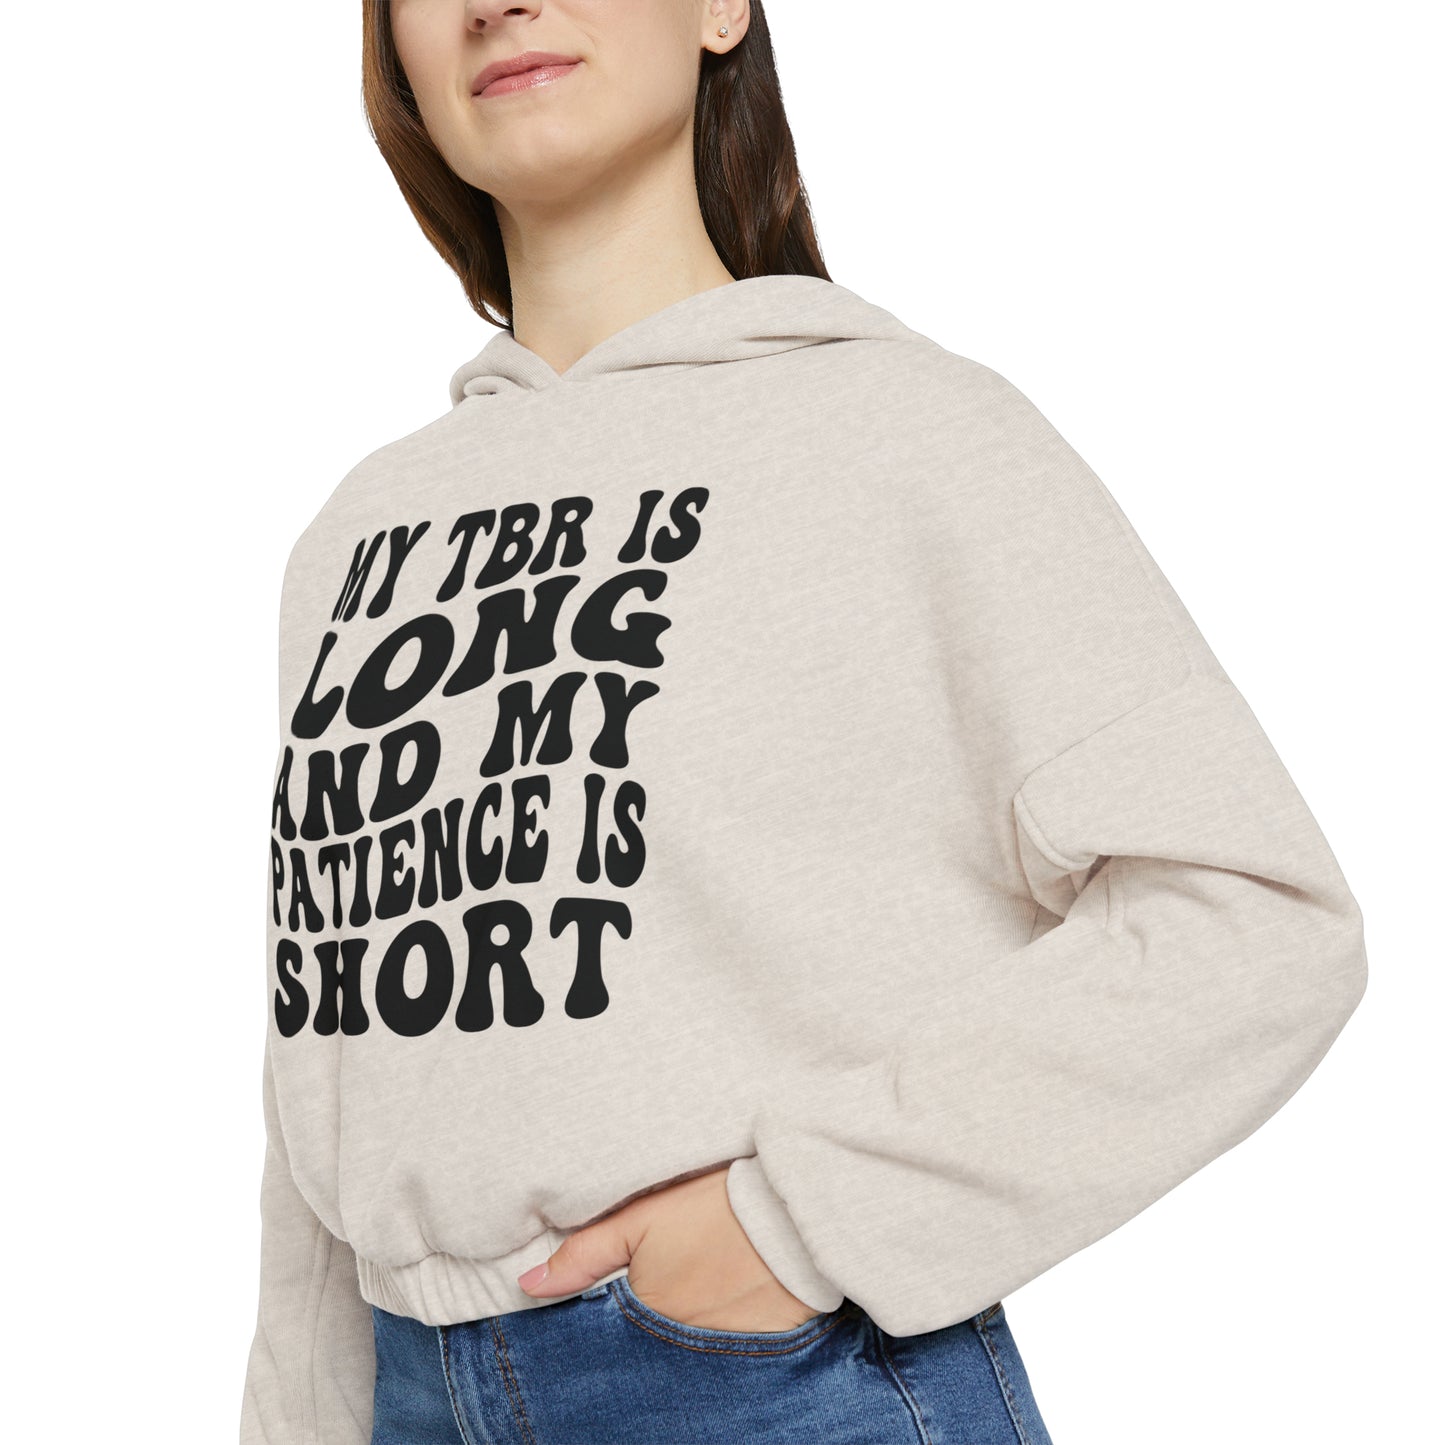 "My TBR is Long and my Patience is Short" Women's Cinched Bottom Hoodie